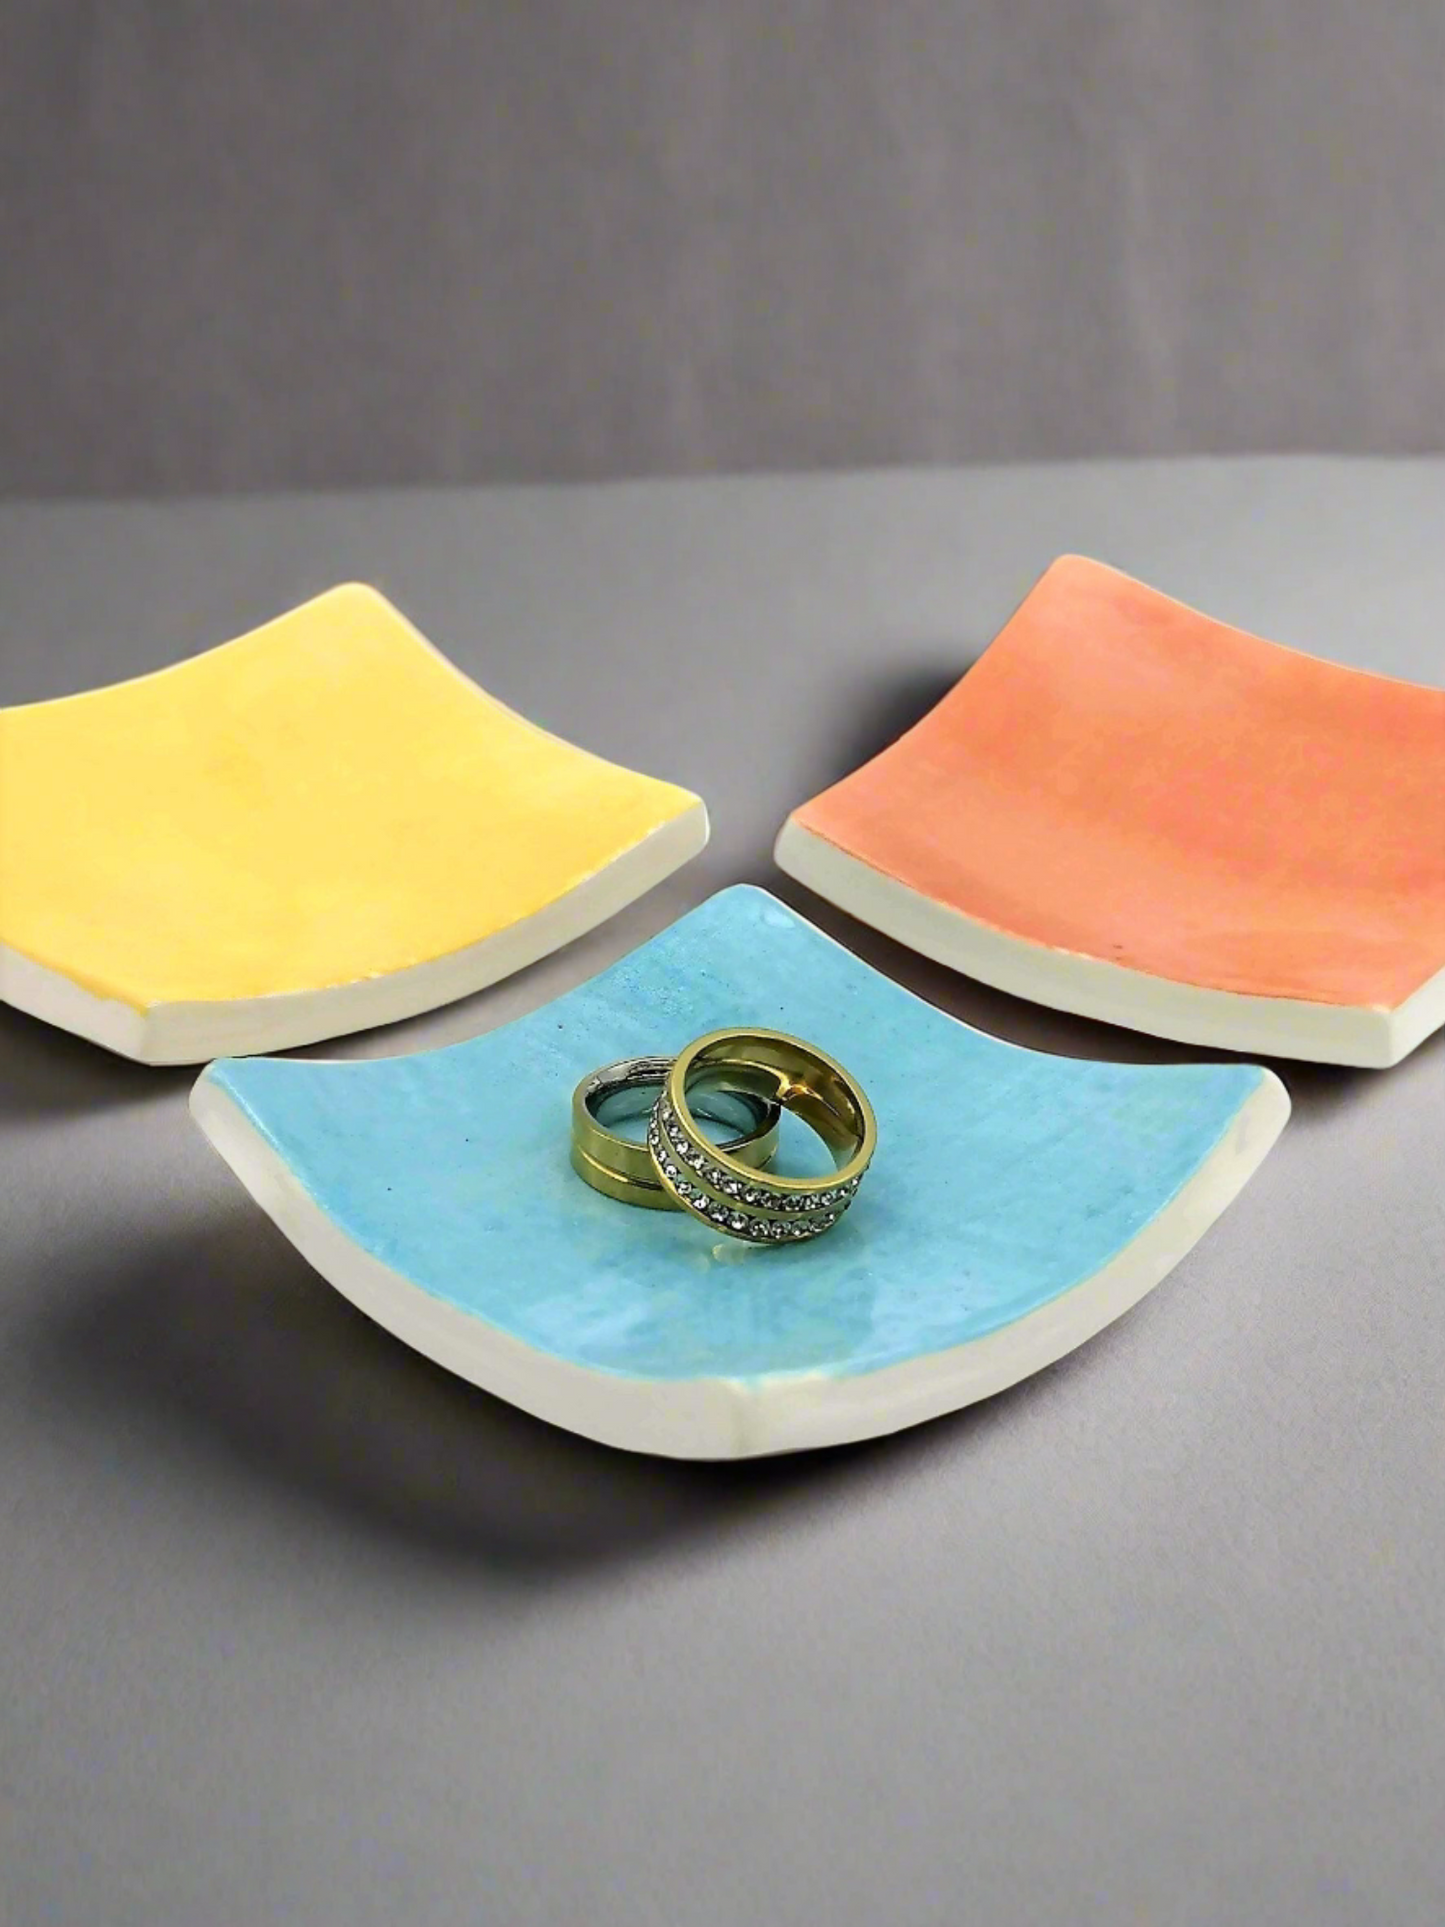 Handmade Square Ceramic Bowls – Versatile Pottery Teabag Holder, Spoon Rest, Candle or Ring Dish – Unique Gifts for Her & Home Decor